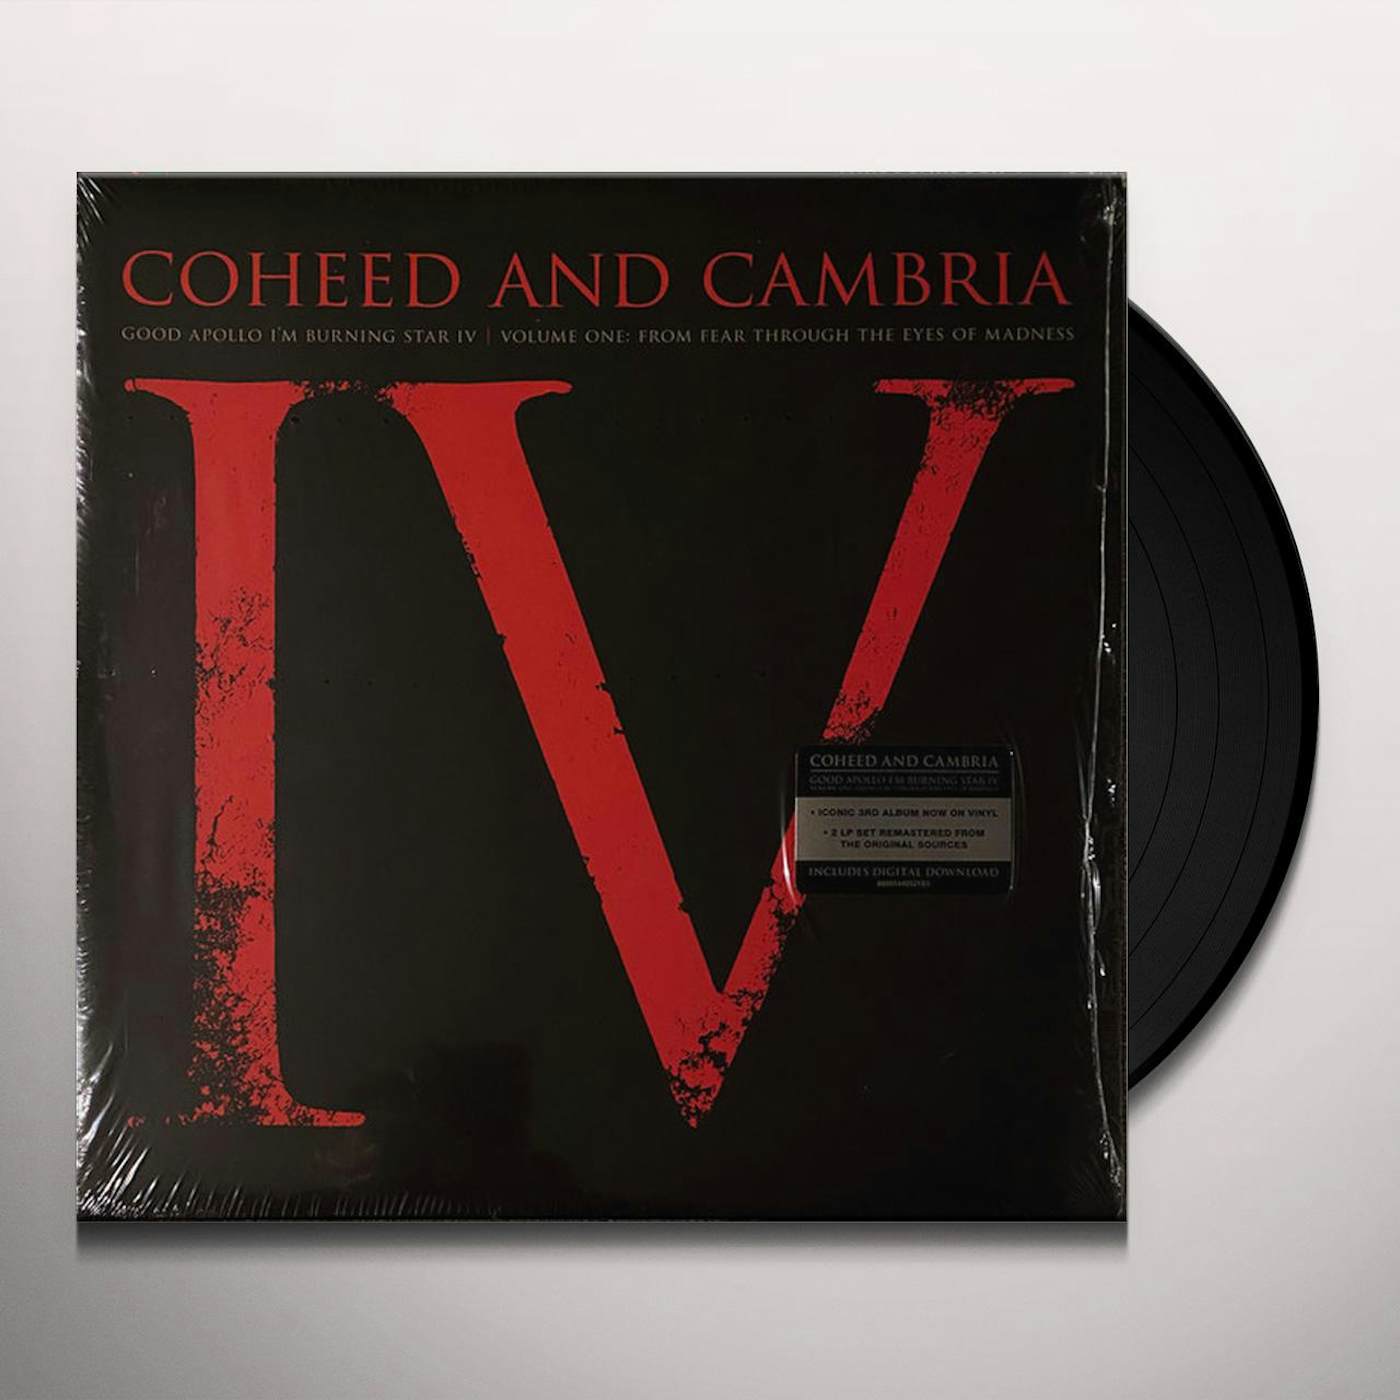 Coheed and Cambria GOOD APOLLO I'M BURNING STAR IV VOL.1:  FROM FEAR THROUGH THE EYES OF MADNESS (2LP/150G/DLCARD) Vinyl Record